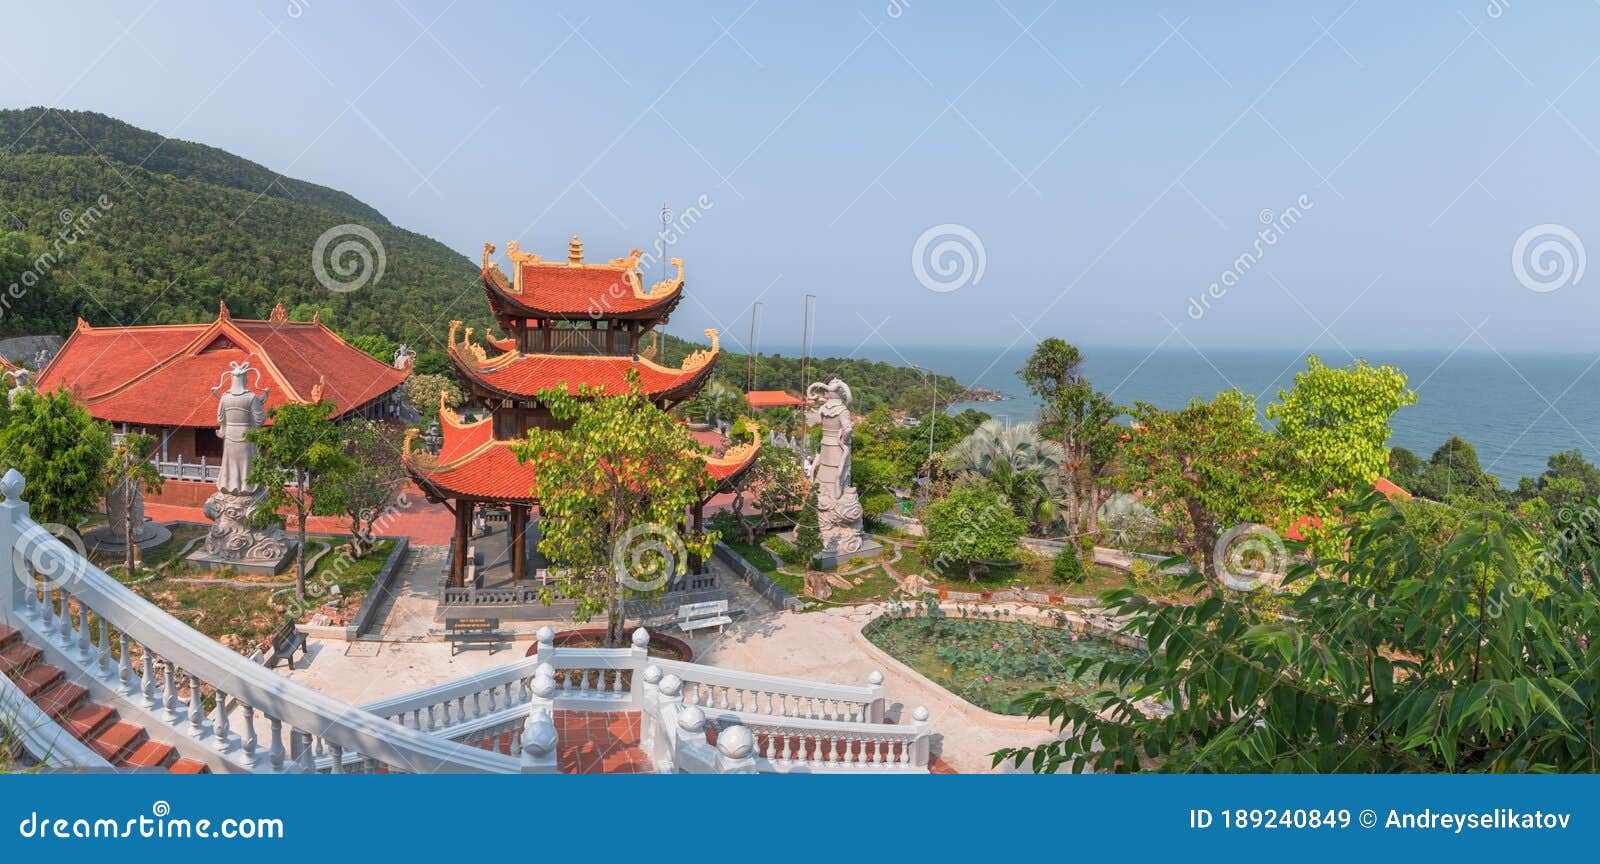 sea view from ho quoc pagoda, kin giang, vietnam